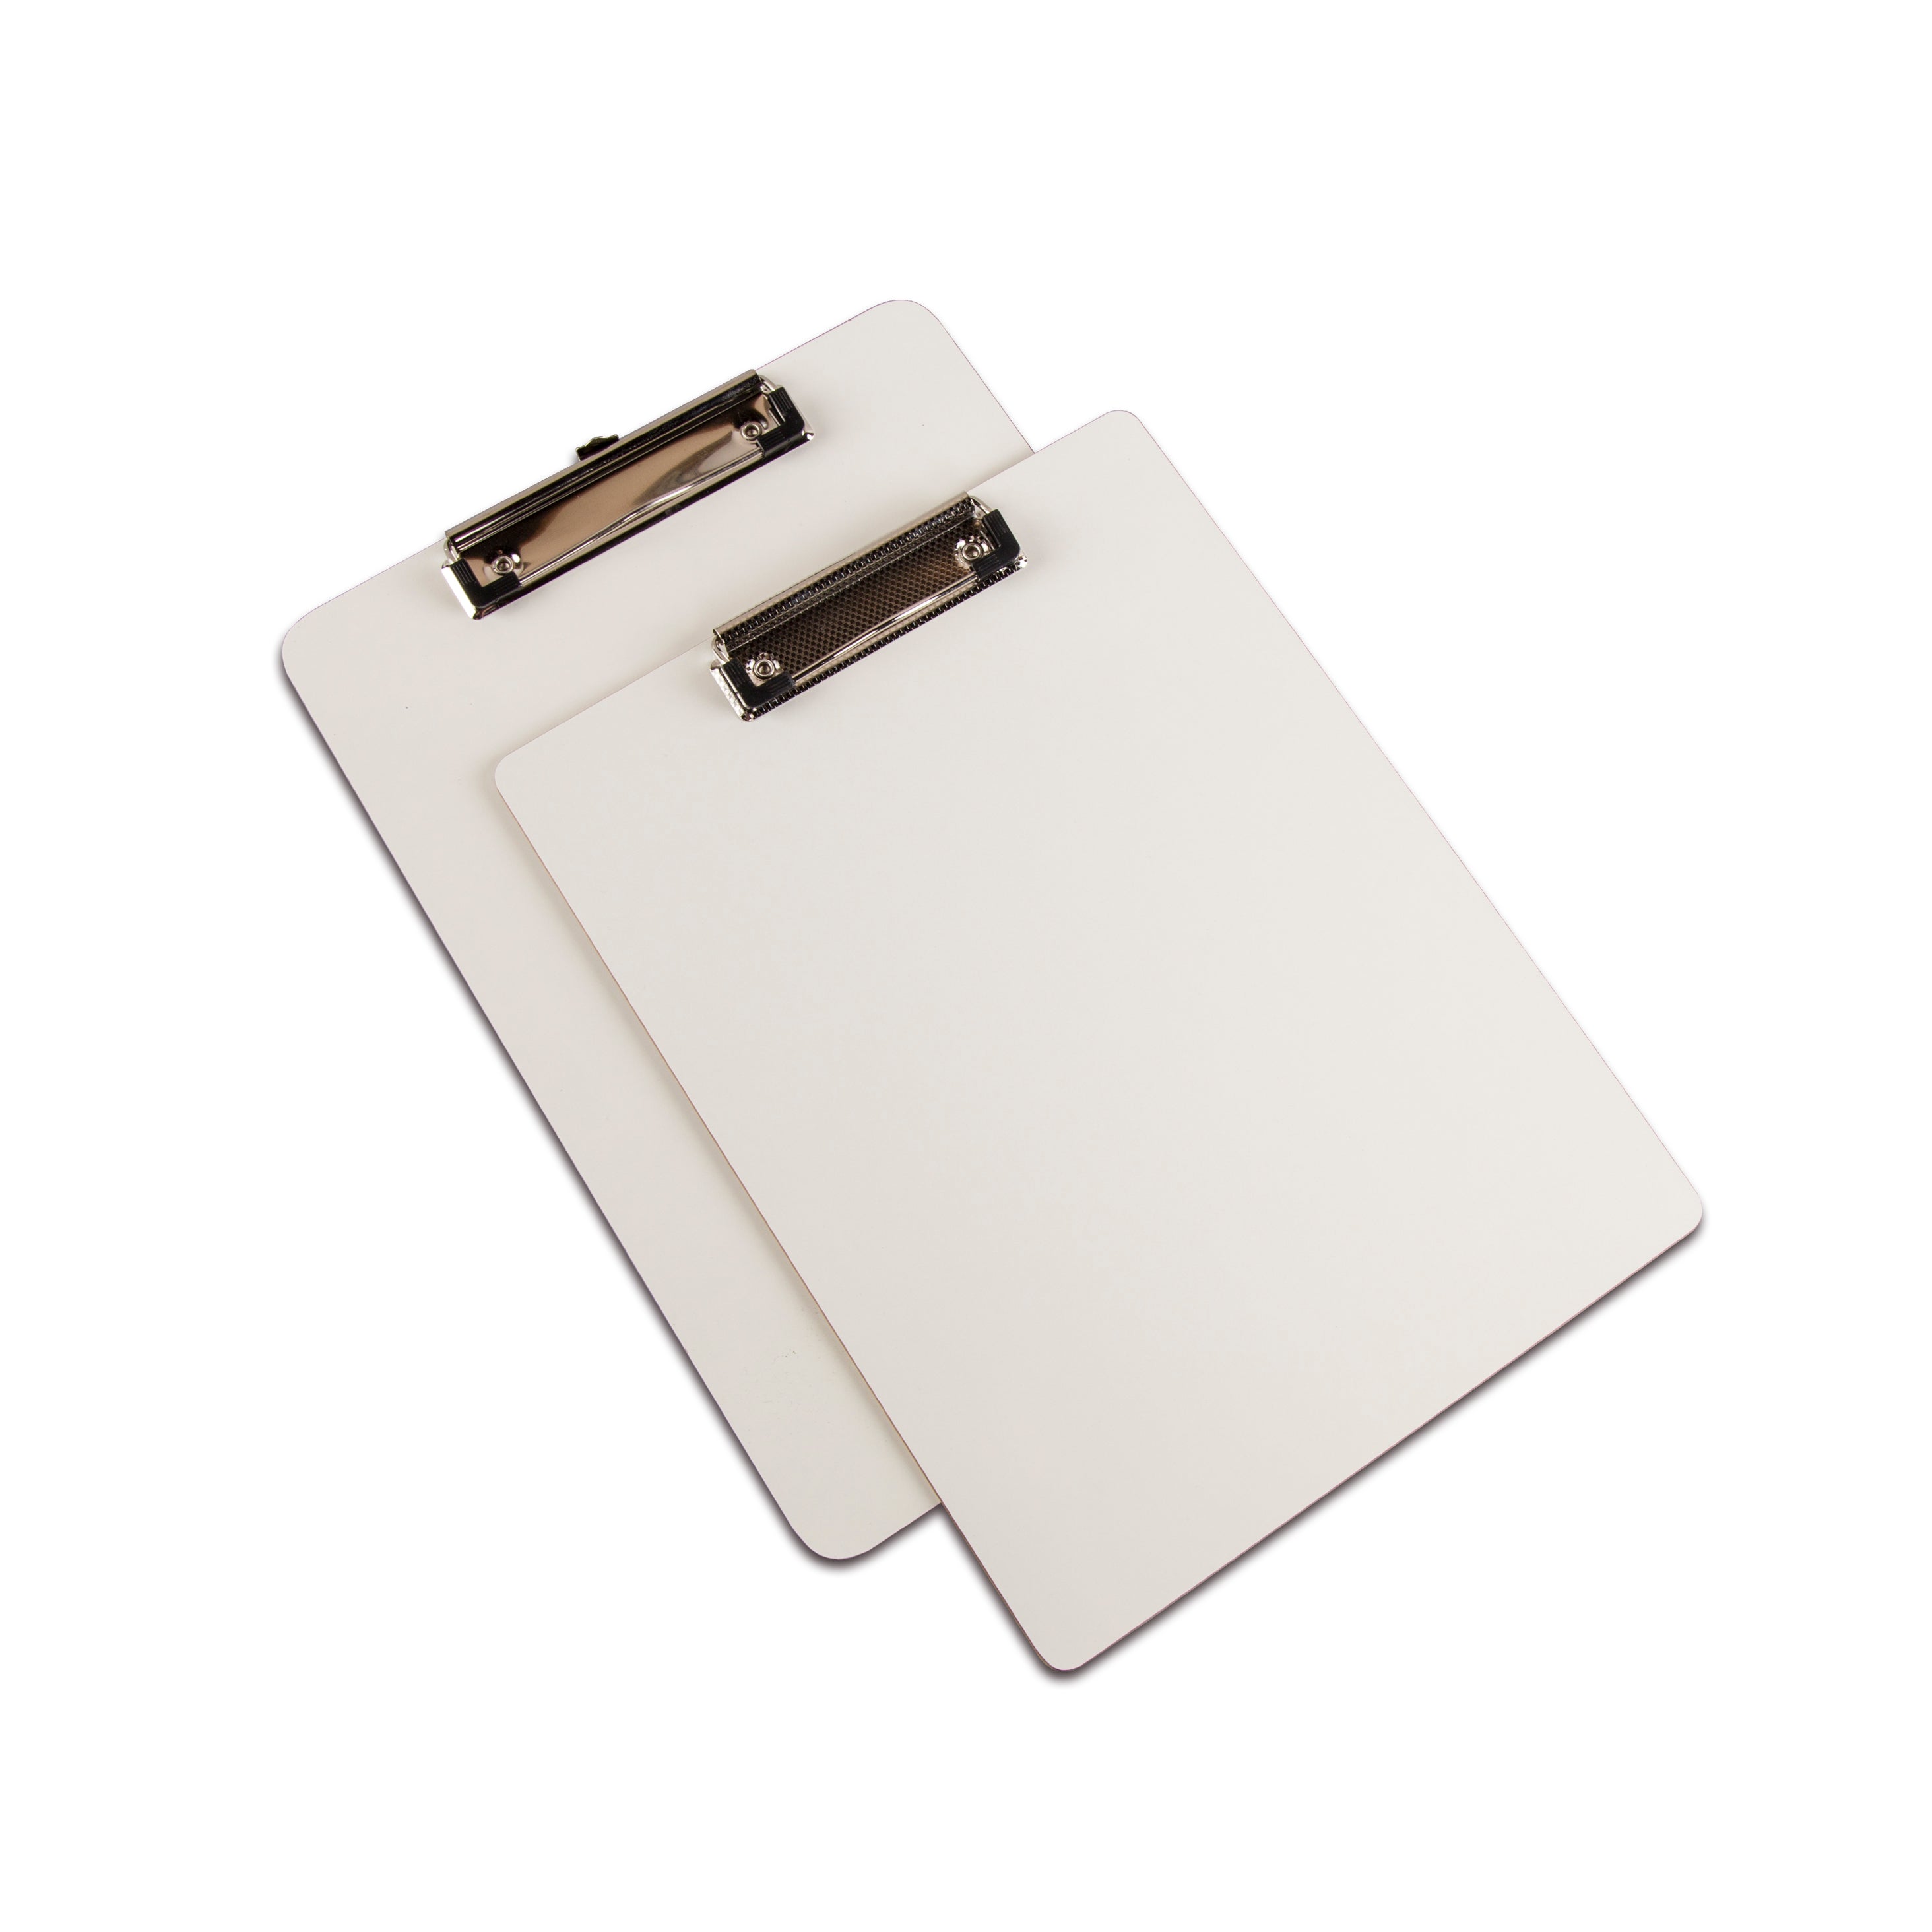 M32 Factory Custom Portable Writing Boards Profile Clip, 9X12 Inch Double Sided Dry Erase Frameless Stationery Clipboard - Premium dry erase lapboard from Madic Whiteboard - Madic Whiteboard